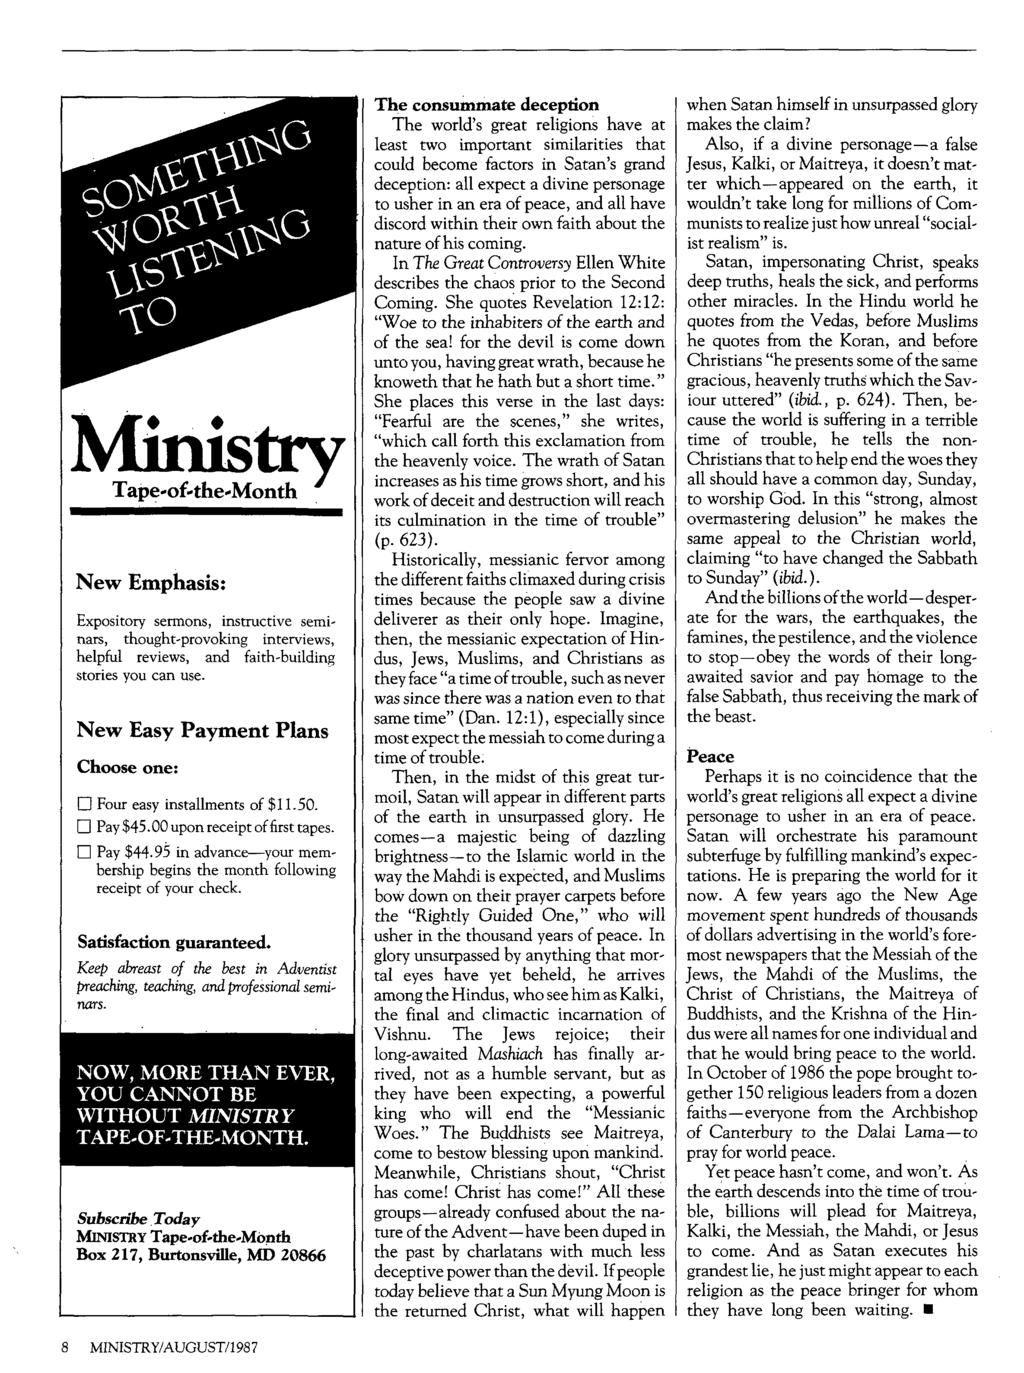 Ministry j Tape-of-the-Month New Emphasis: Expository sermons, instructive semi nars, thought-provoking interviews, helpful reviews, and faith-building stories you can use.